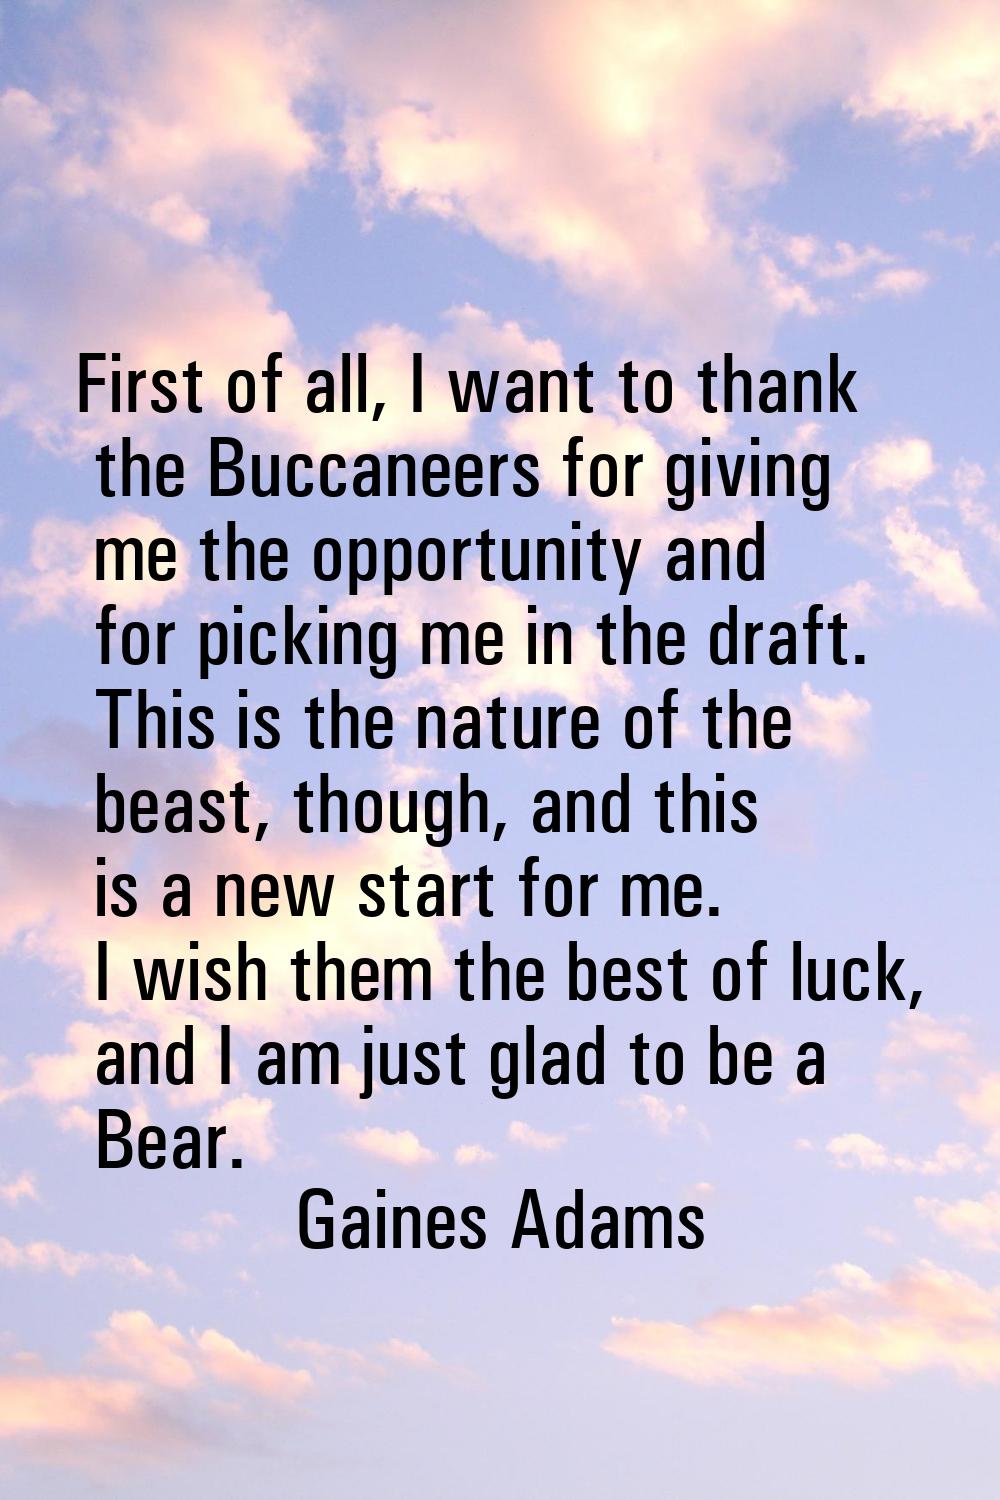 First of all, I want to thank the Buccaneers for giving me the opportunity and for picking me in th